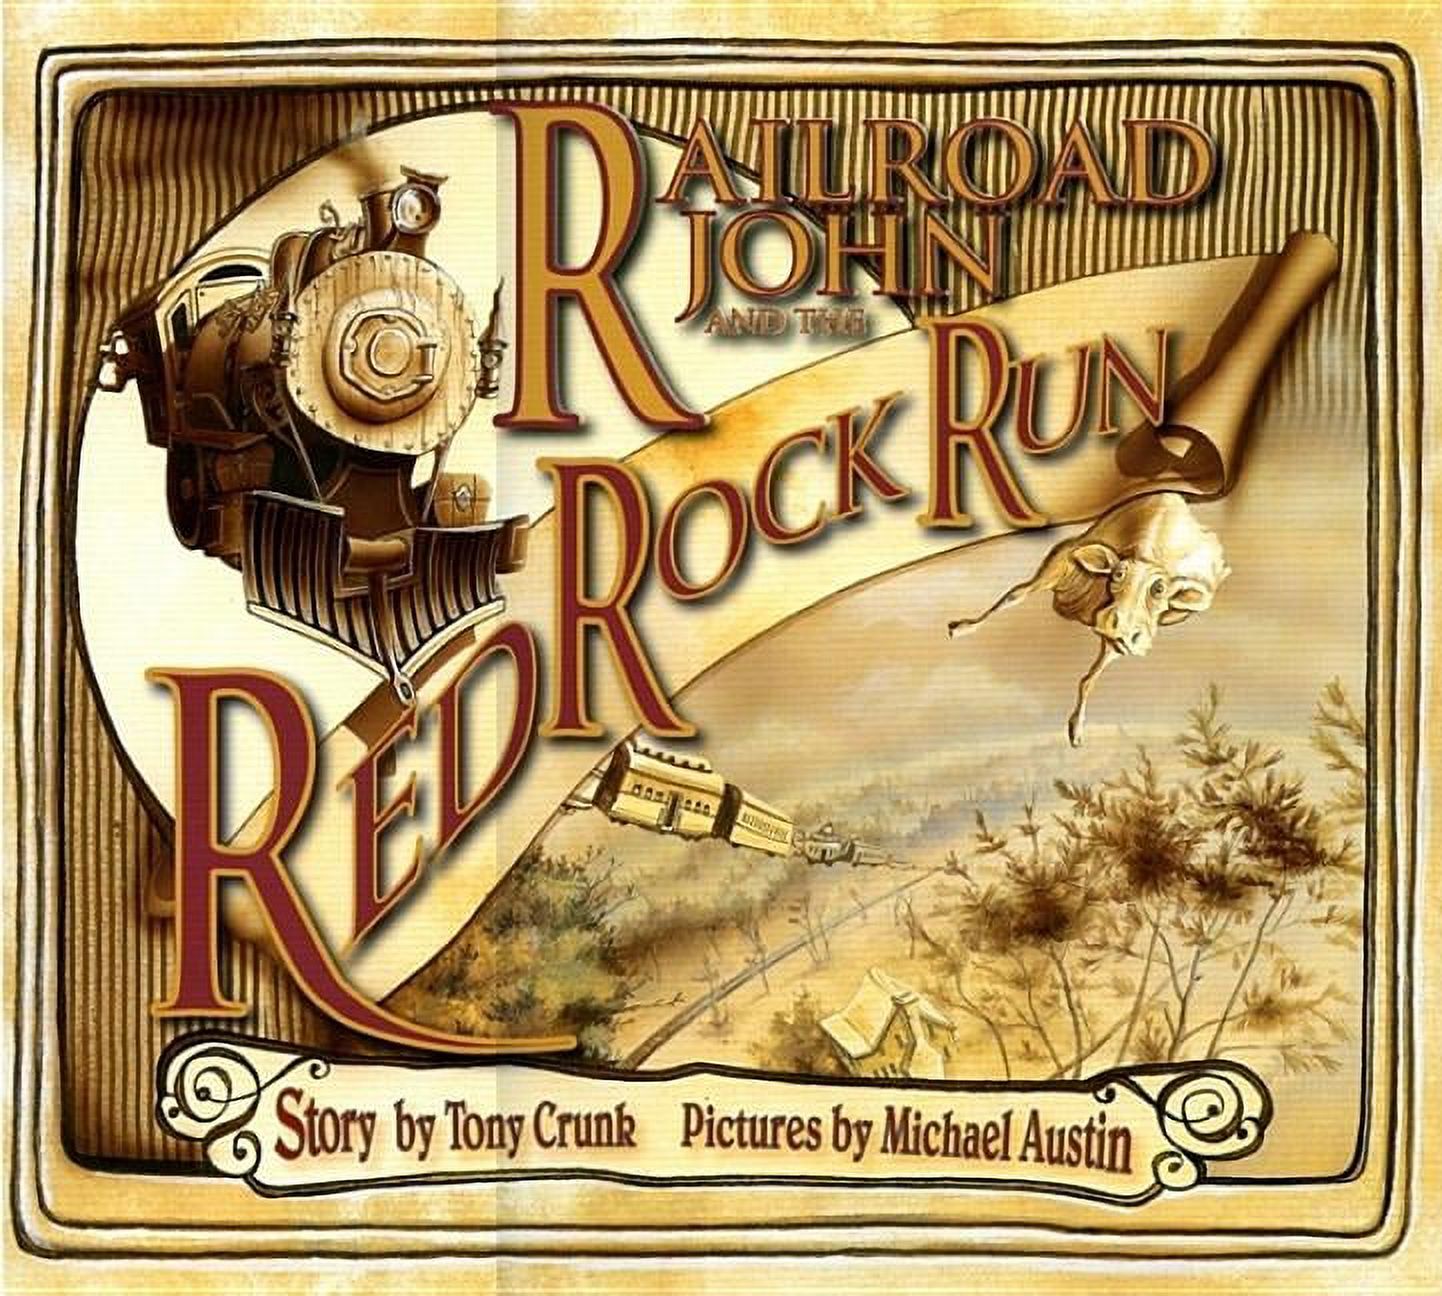 Railroad John and the Red Rock Run (Hardcover) - image 1 of 1